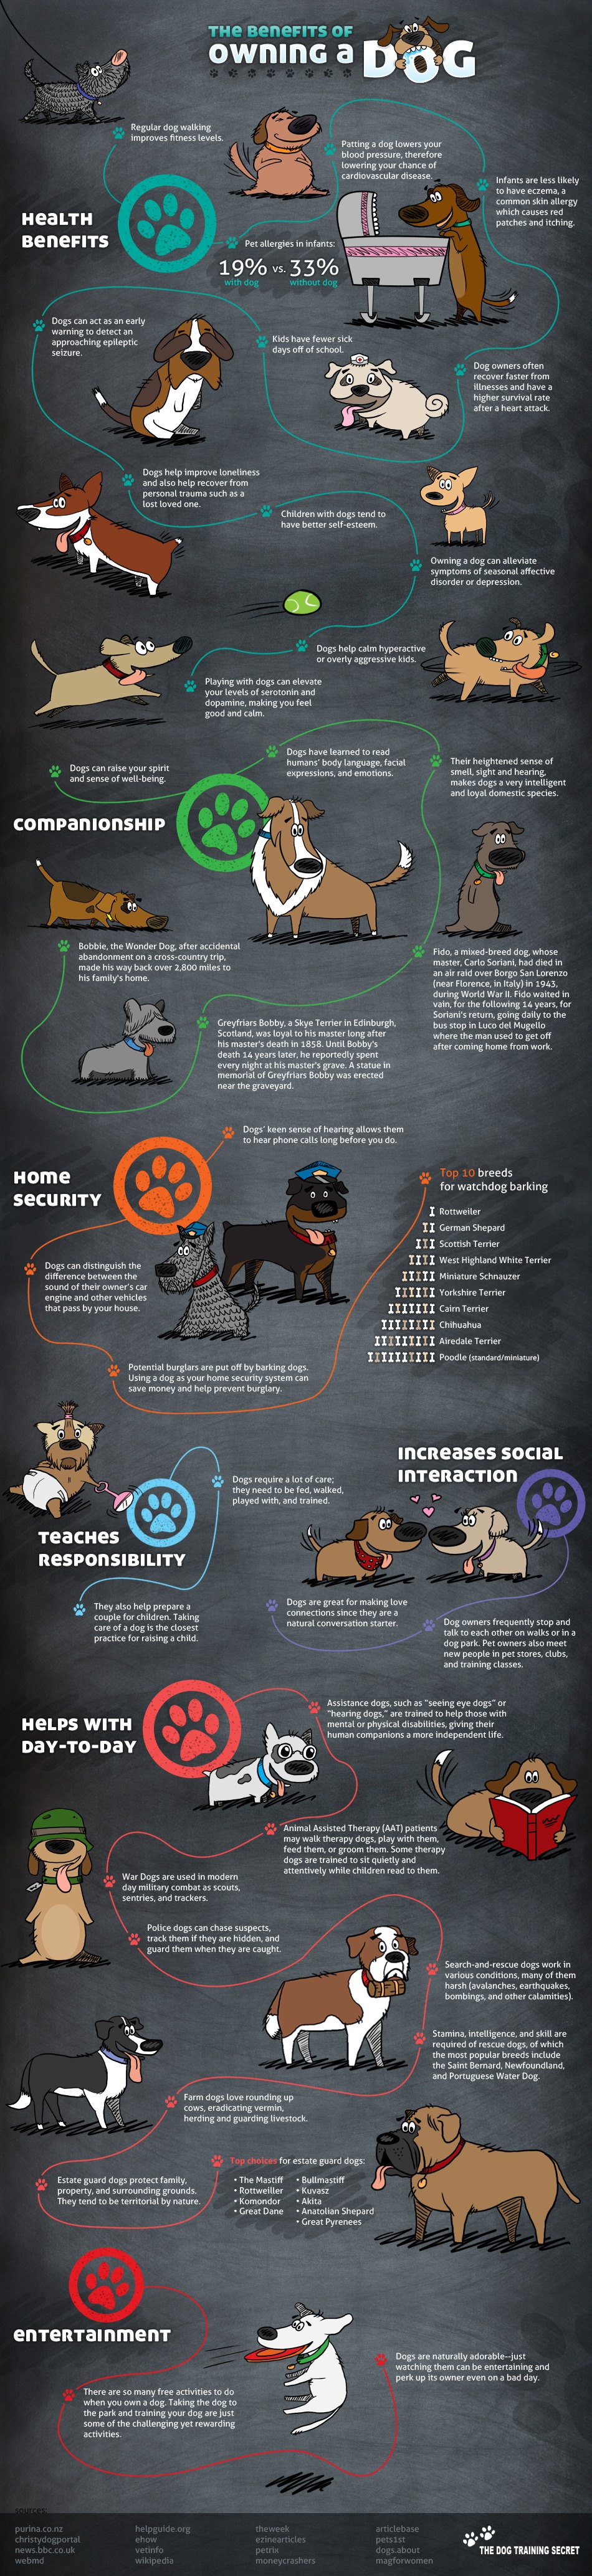 Discover The Amazing Health Benefits Of Owning a Dog